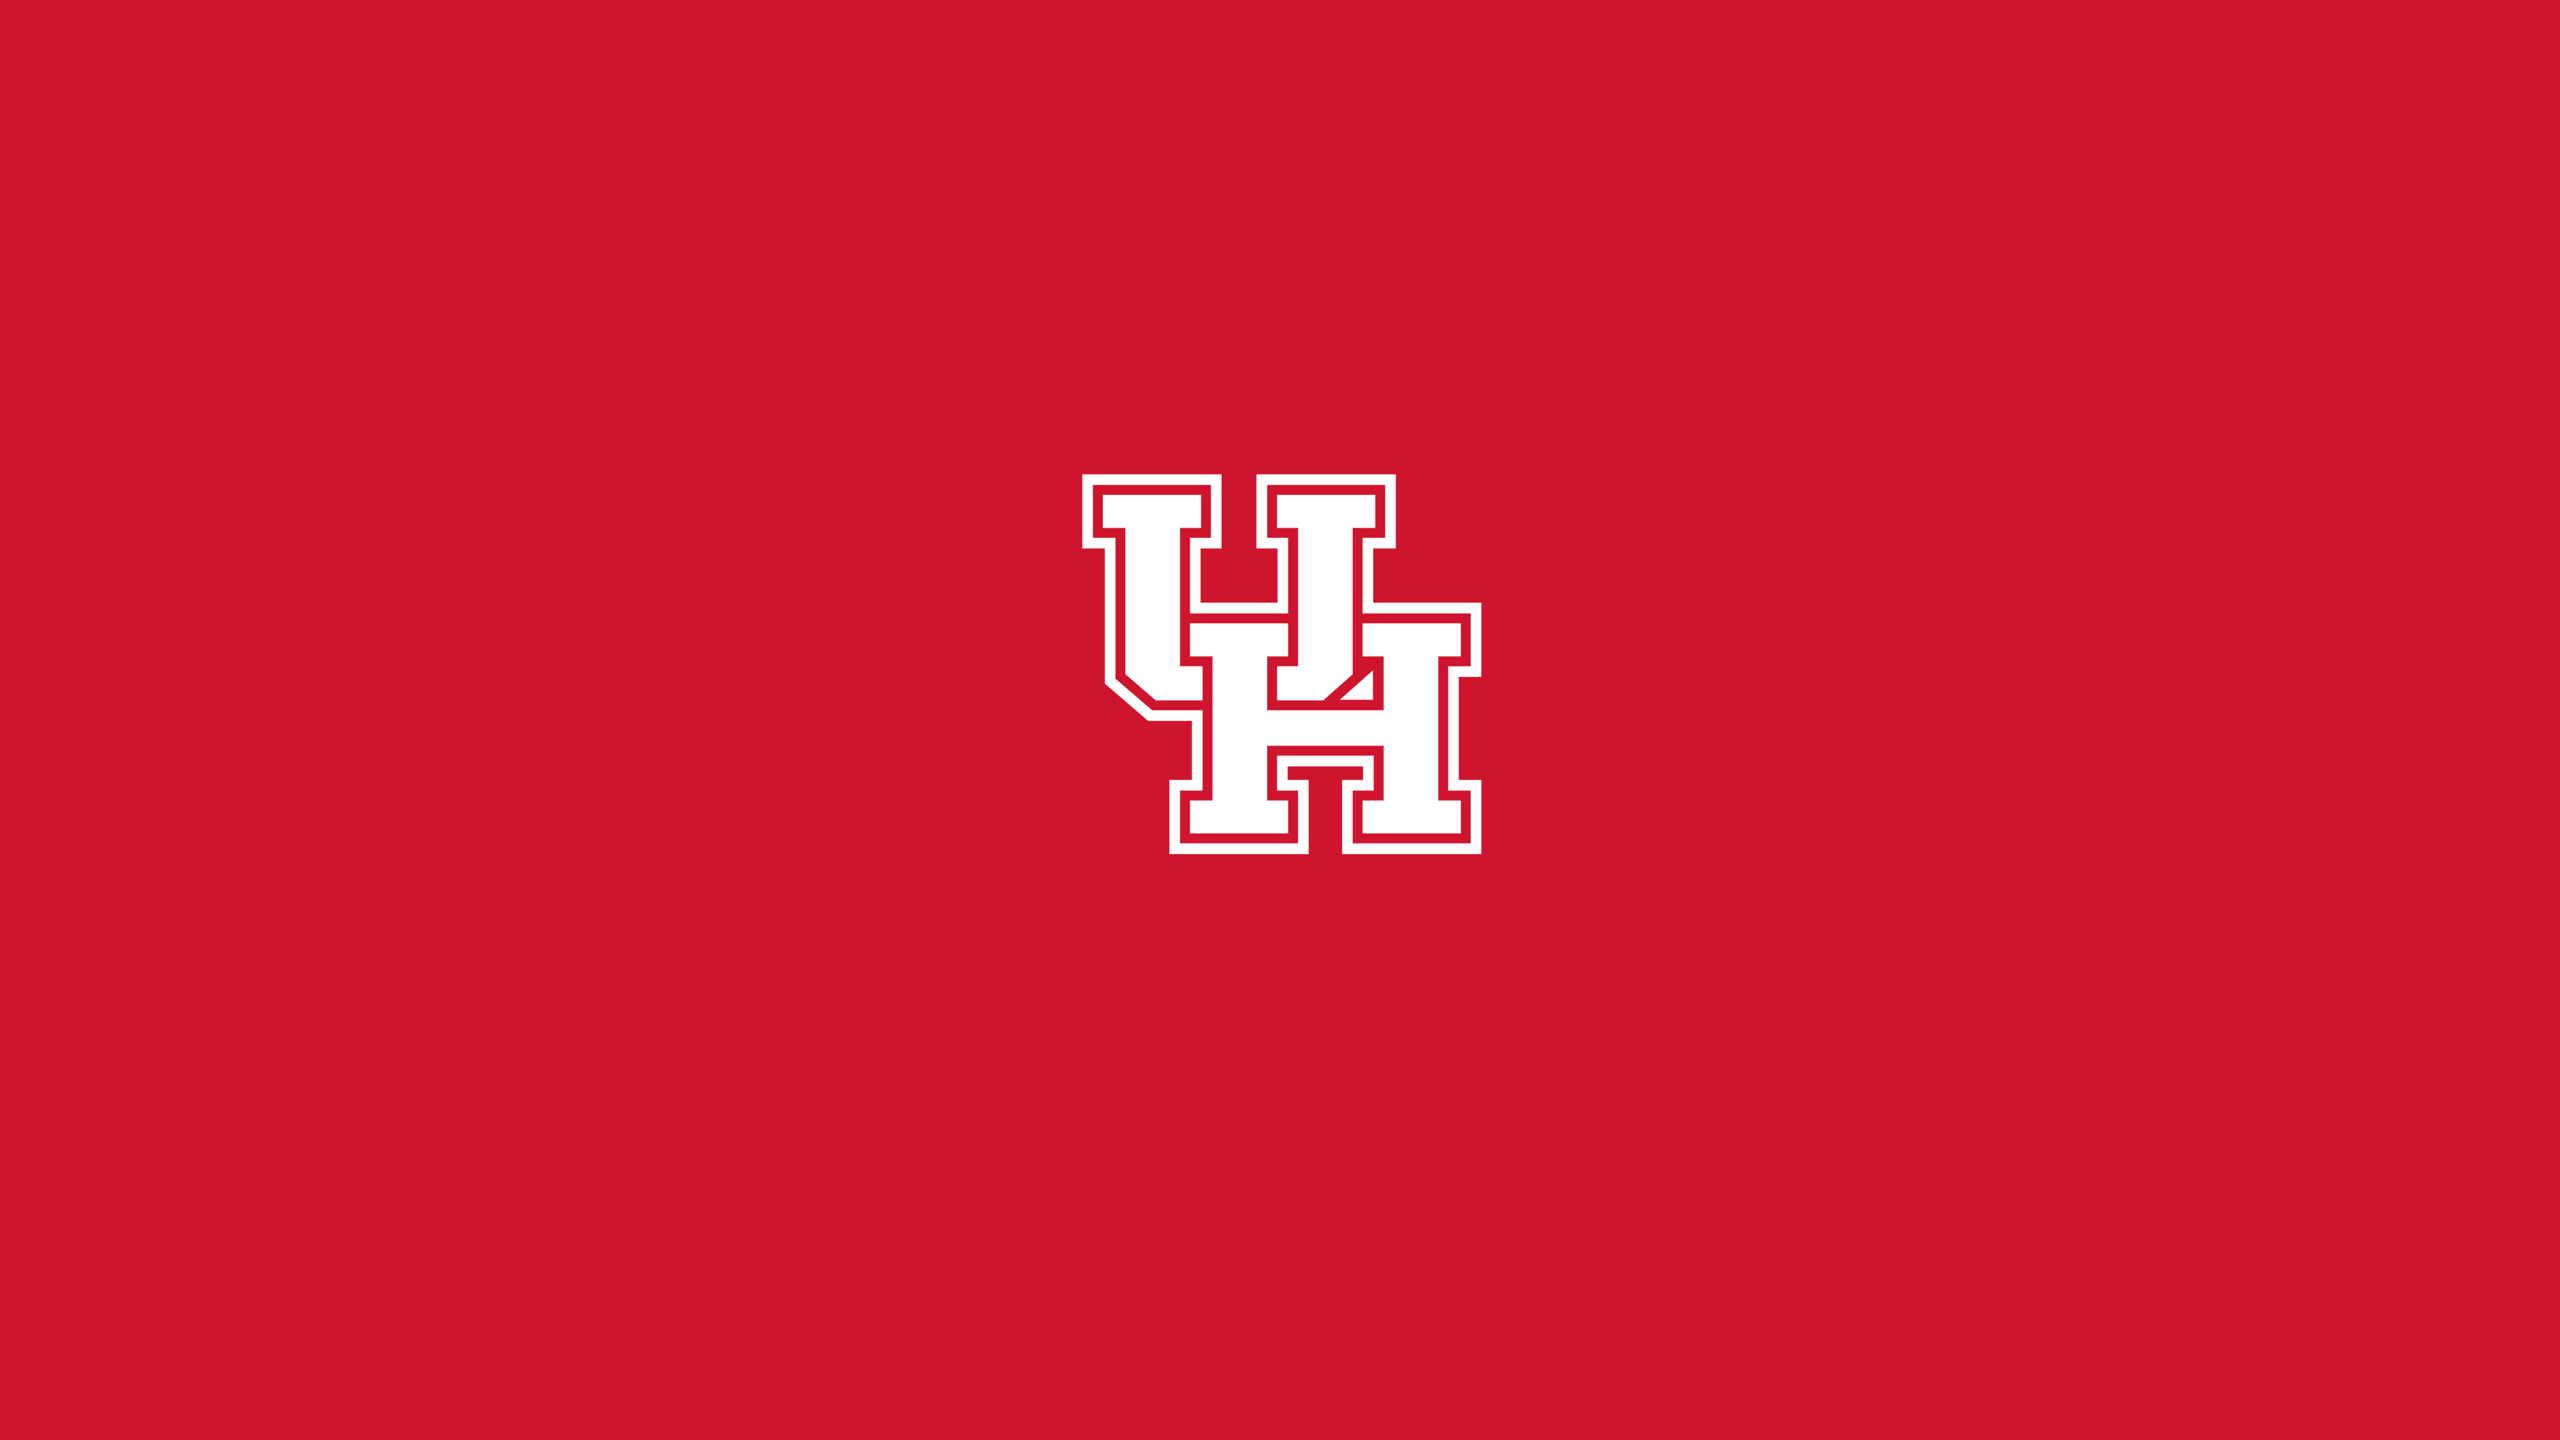 Houston Cougars Football - NCAAF - Square Bettor